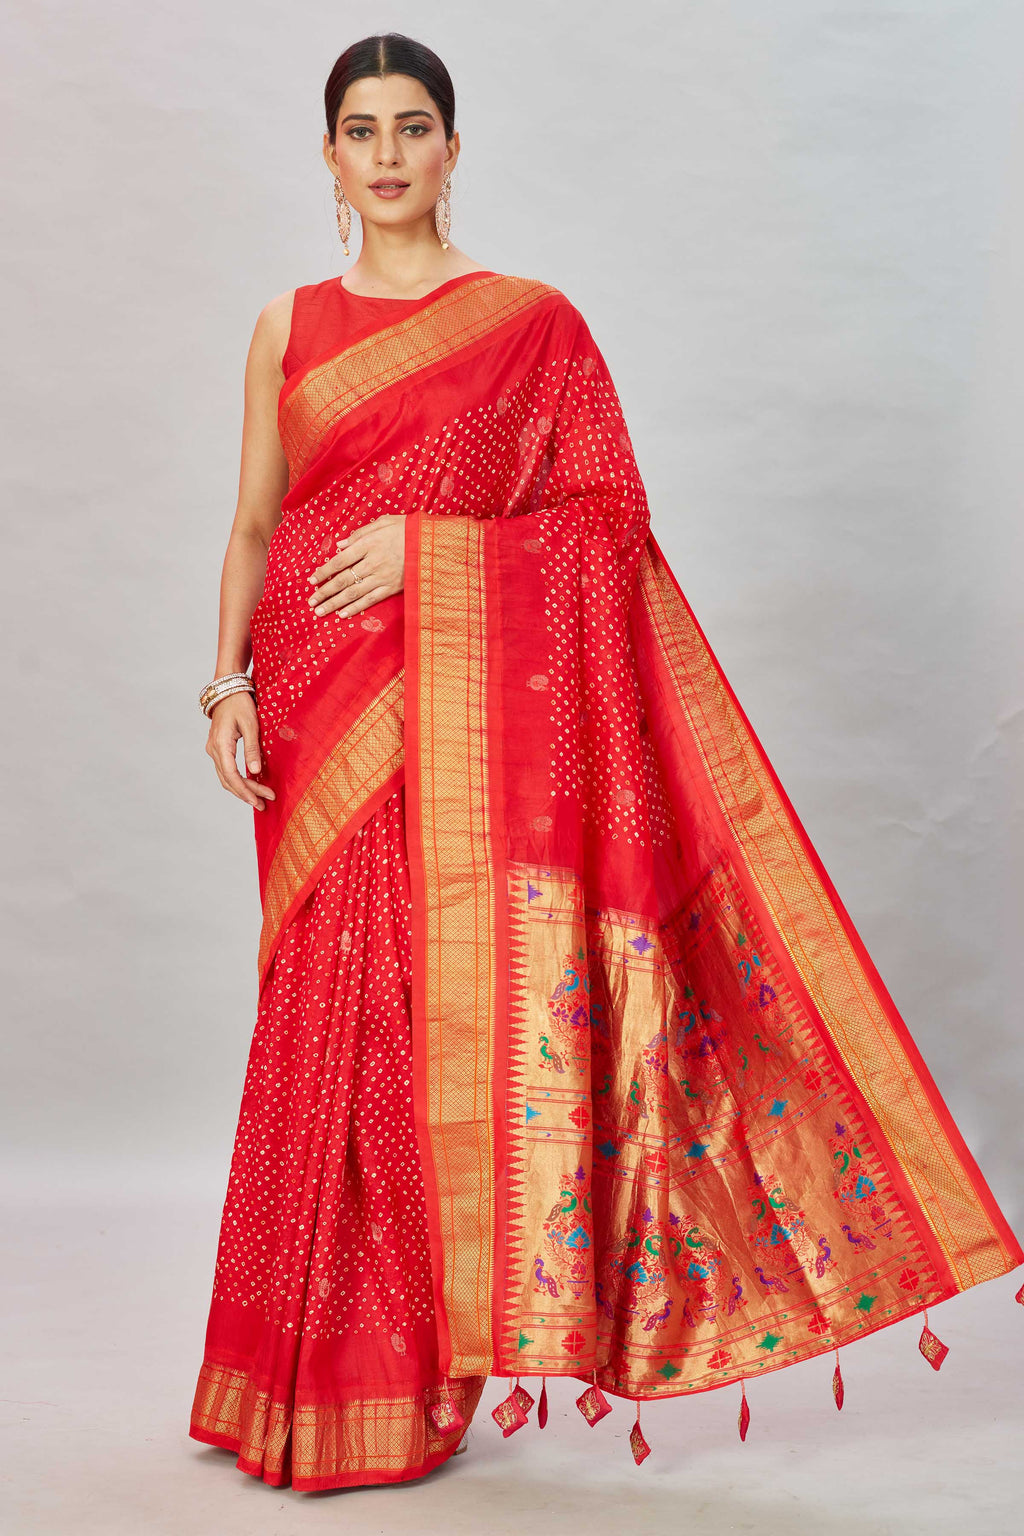 Shop red bandhej Kanjivaram silk sari online in USA with Paithani pallu. Look your best on festive occasions in latest designer sarees, pure silk sarees, Kanjivaram silk saris, handwoven saris, tussar silk sarees, embroidered saris from Pure Elegance Indian clothing store in USA.-full view